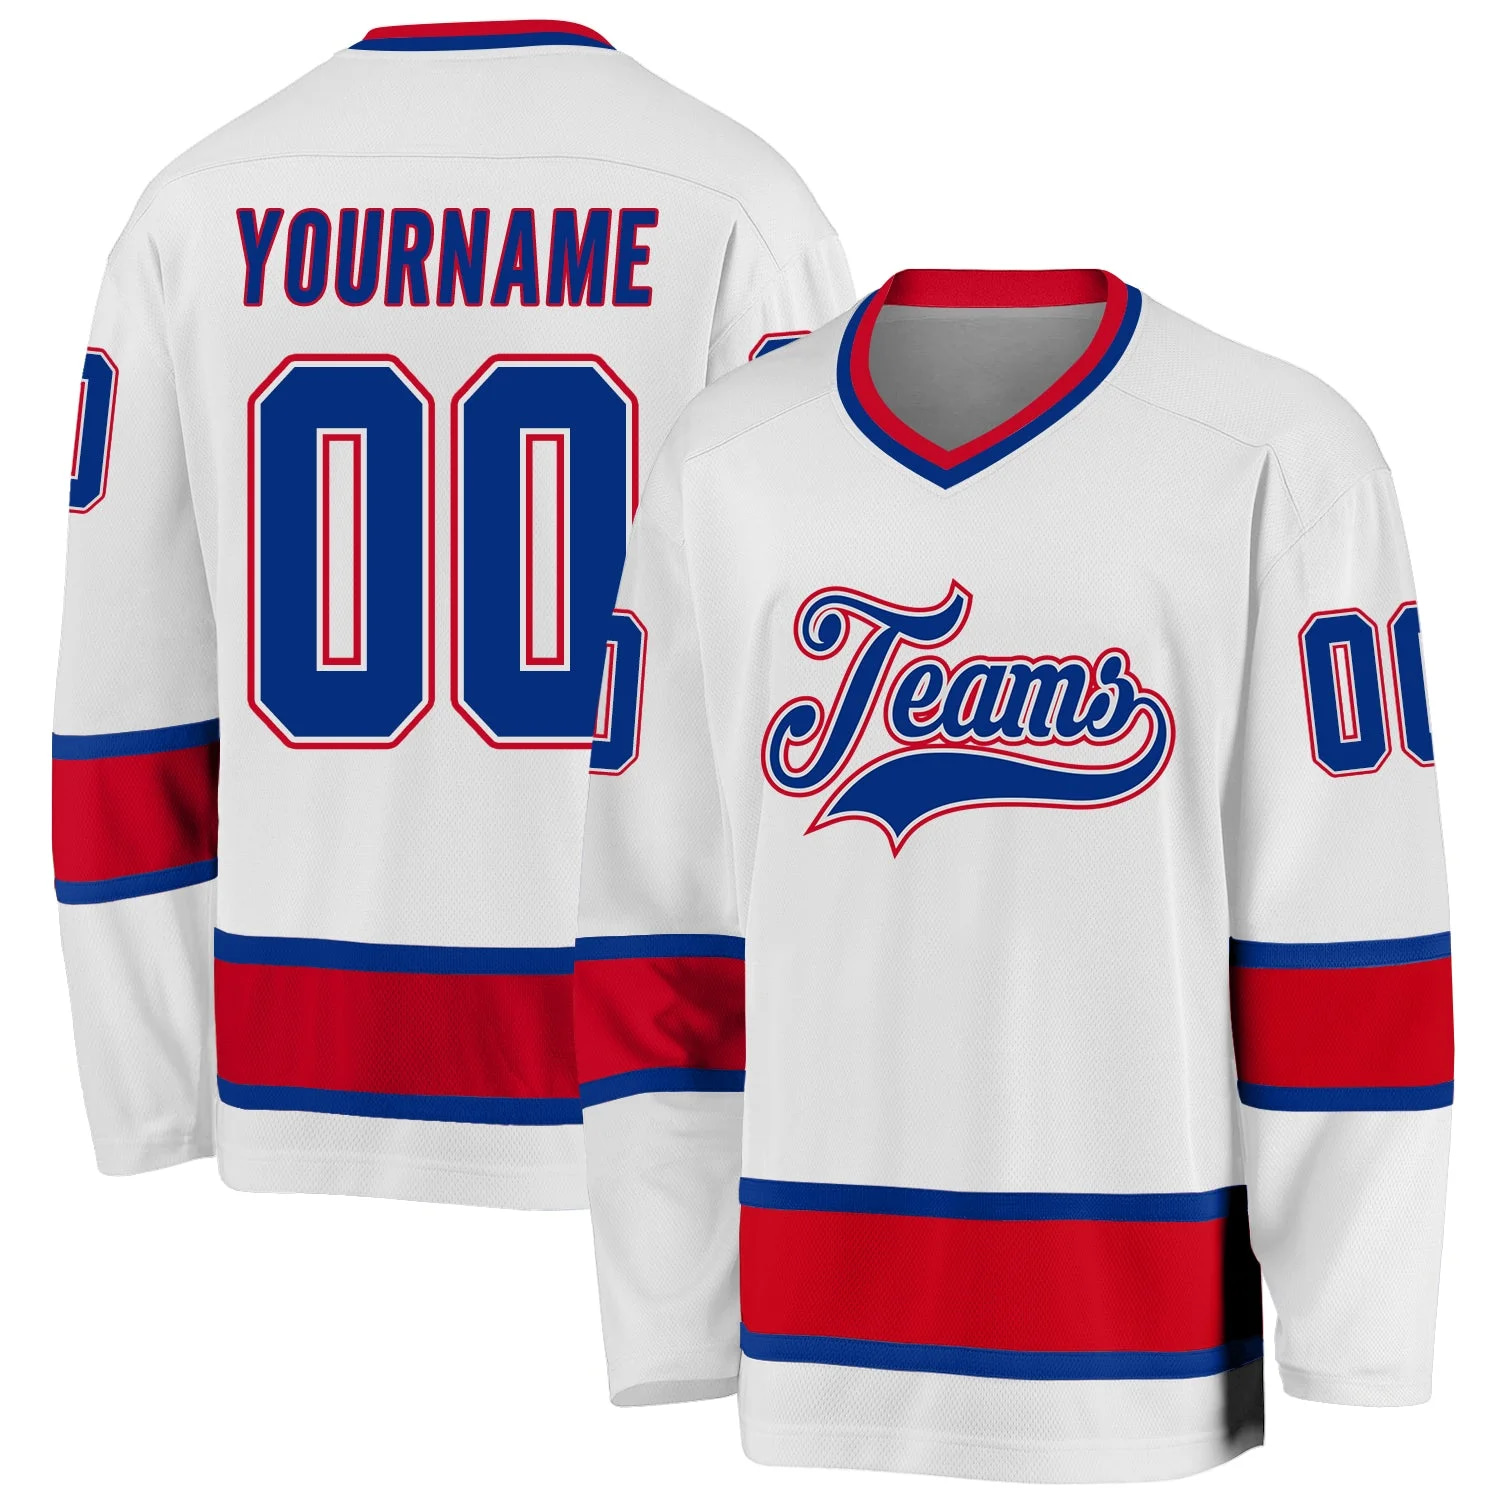 Stitched And Print White Royal-red Hockey Jersey Custom